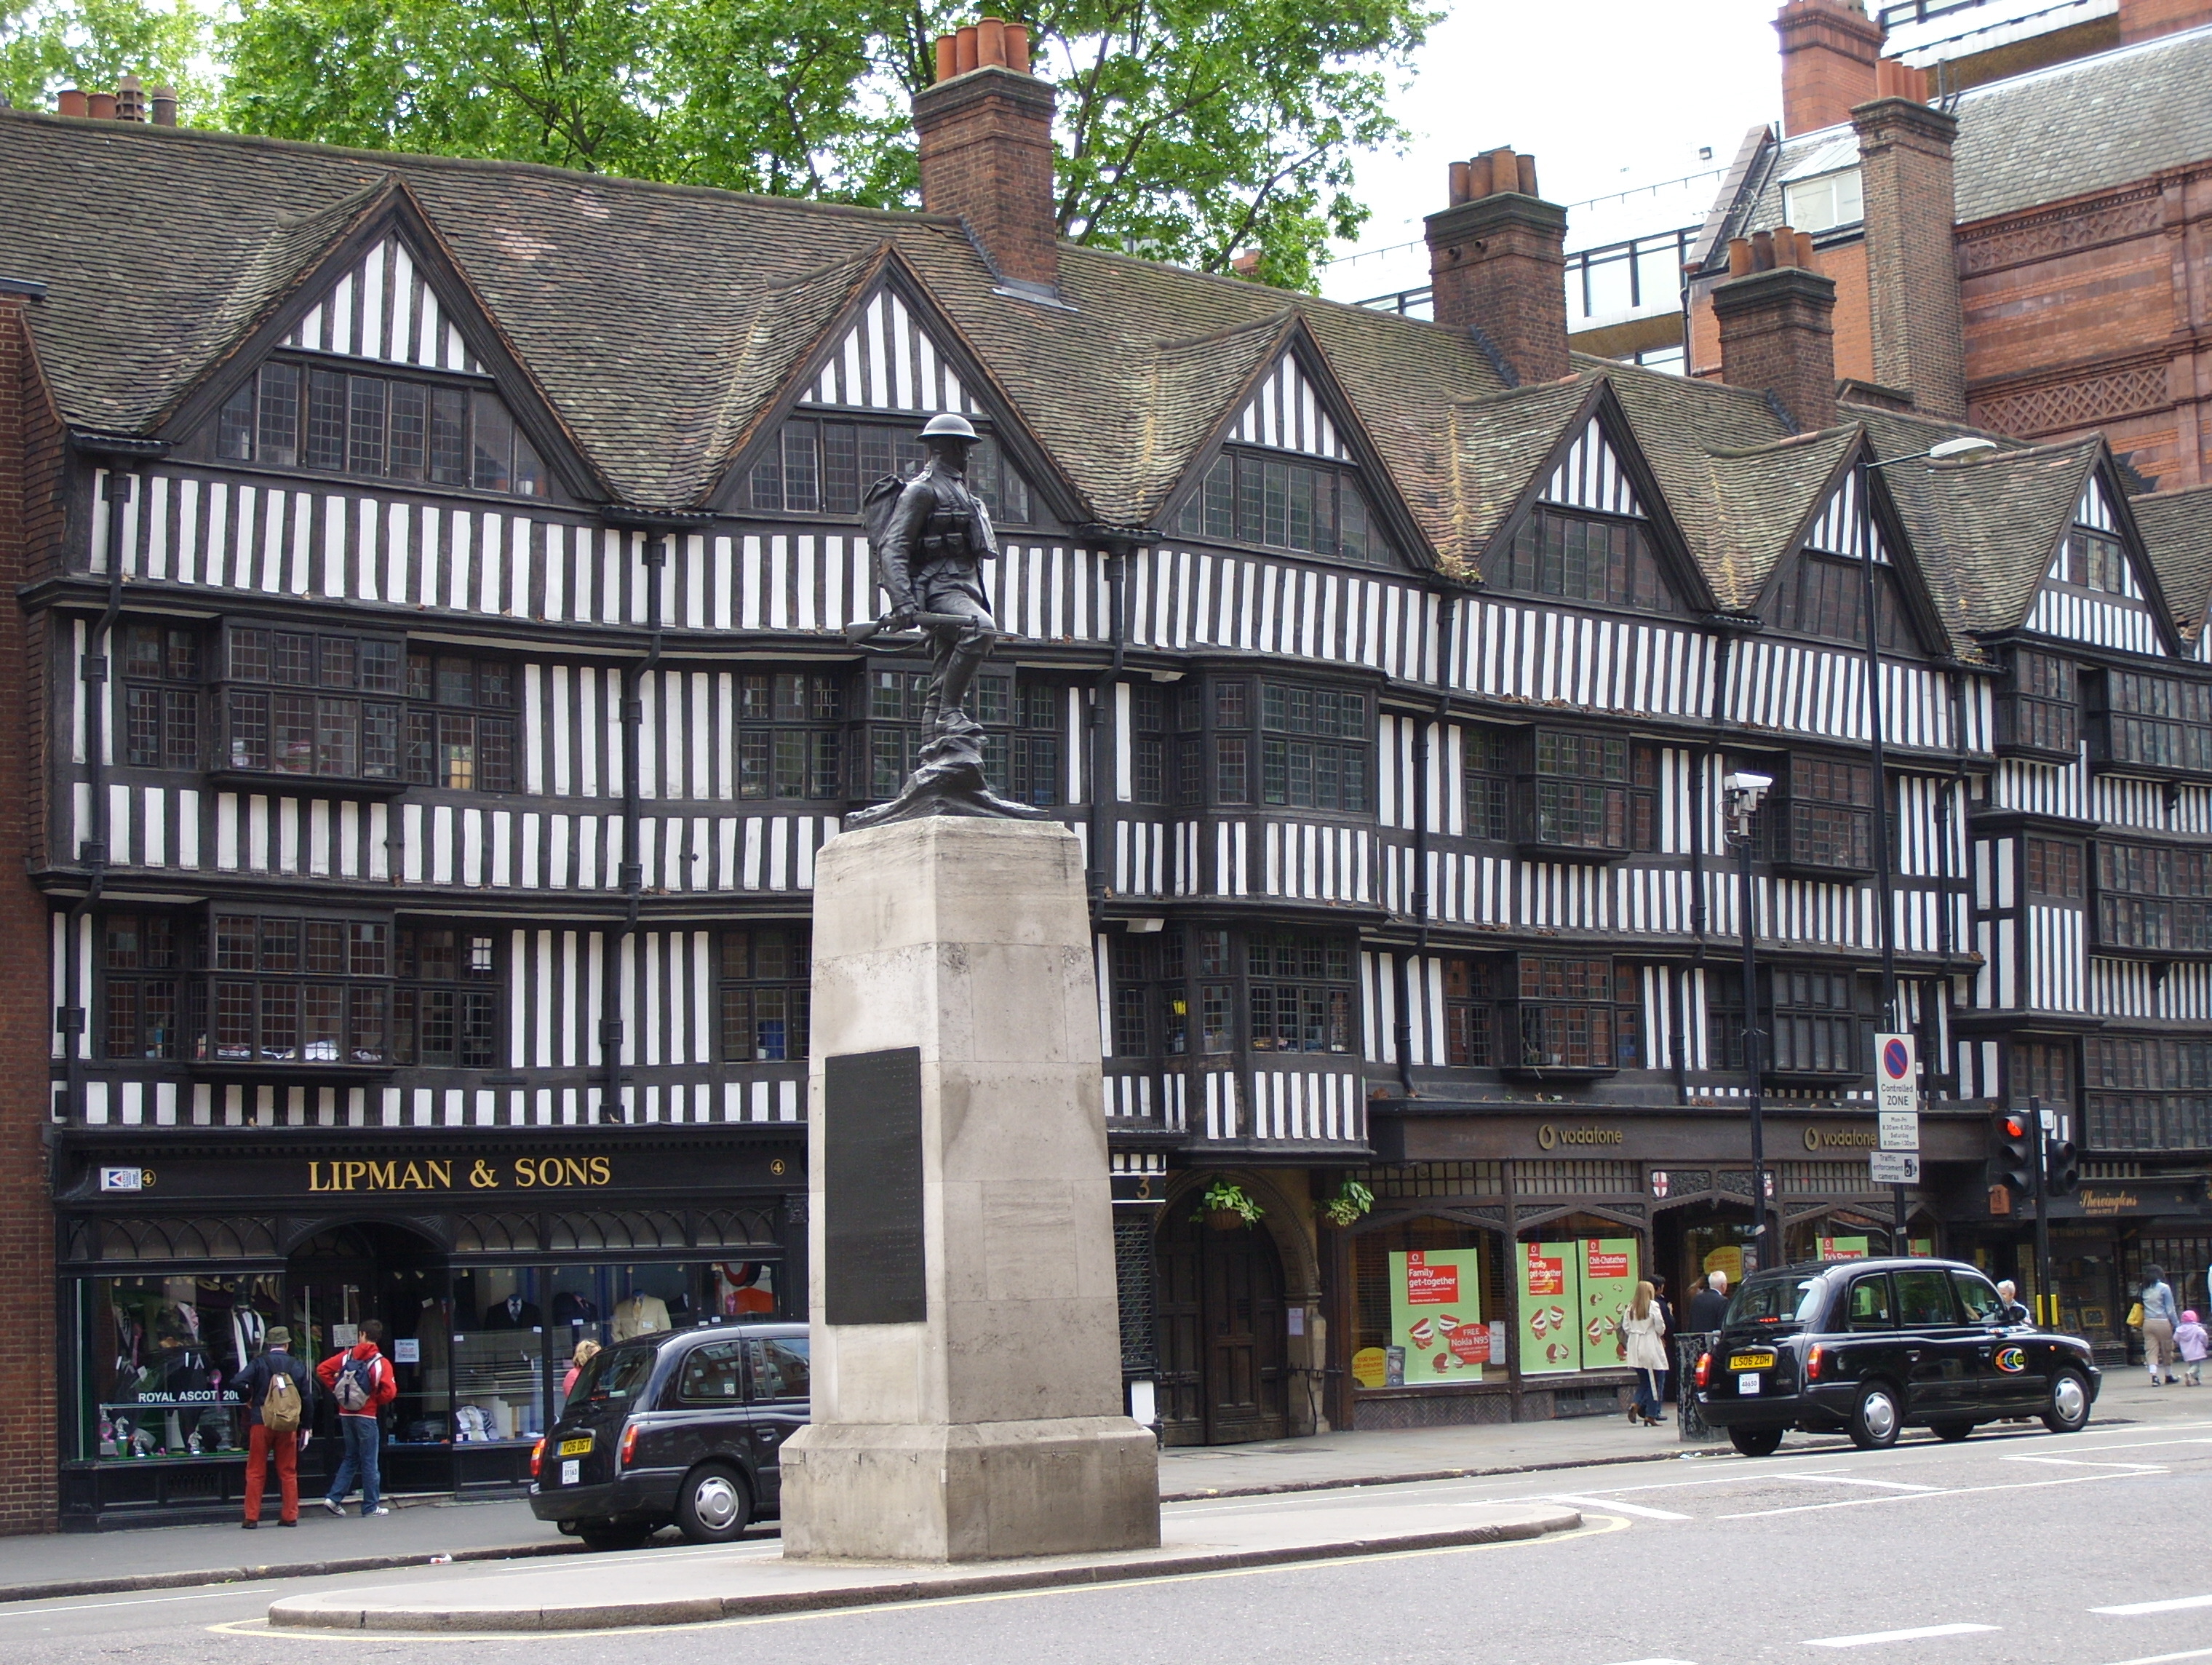 The half-timbered Staple Inn in Holborn, London. Photo taken on May 12, 2007.